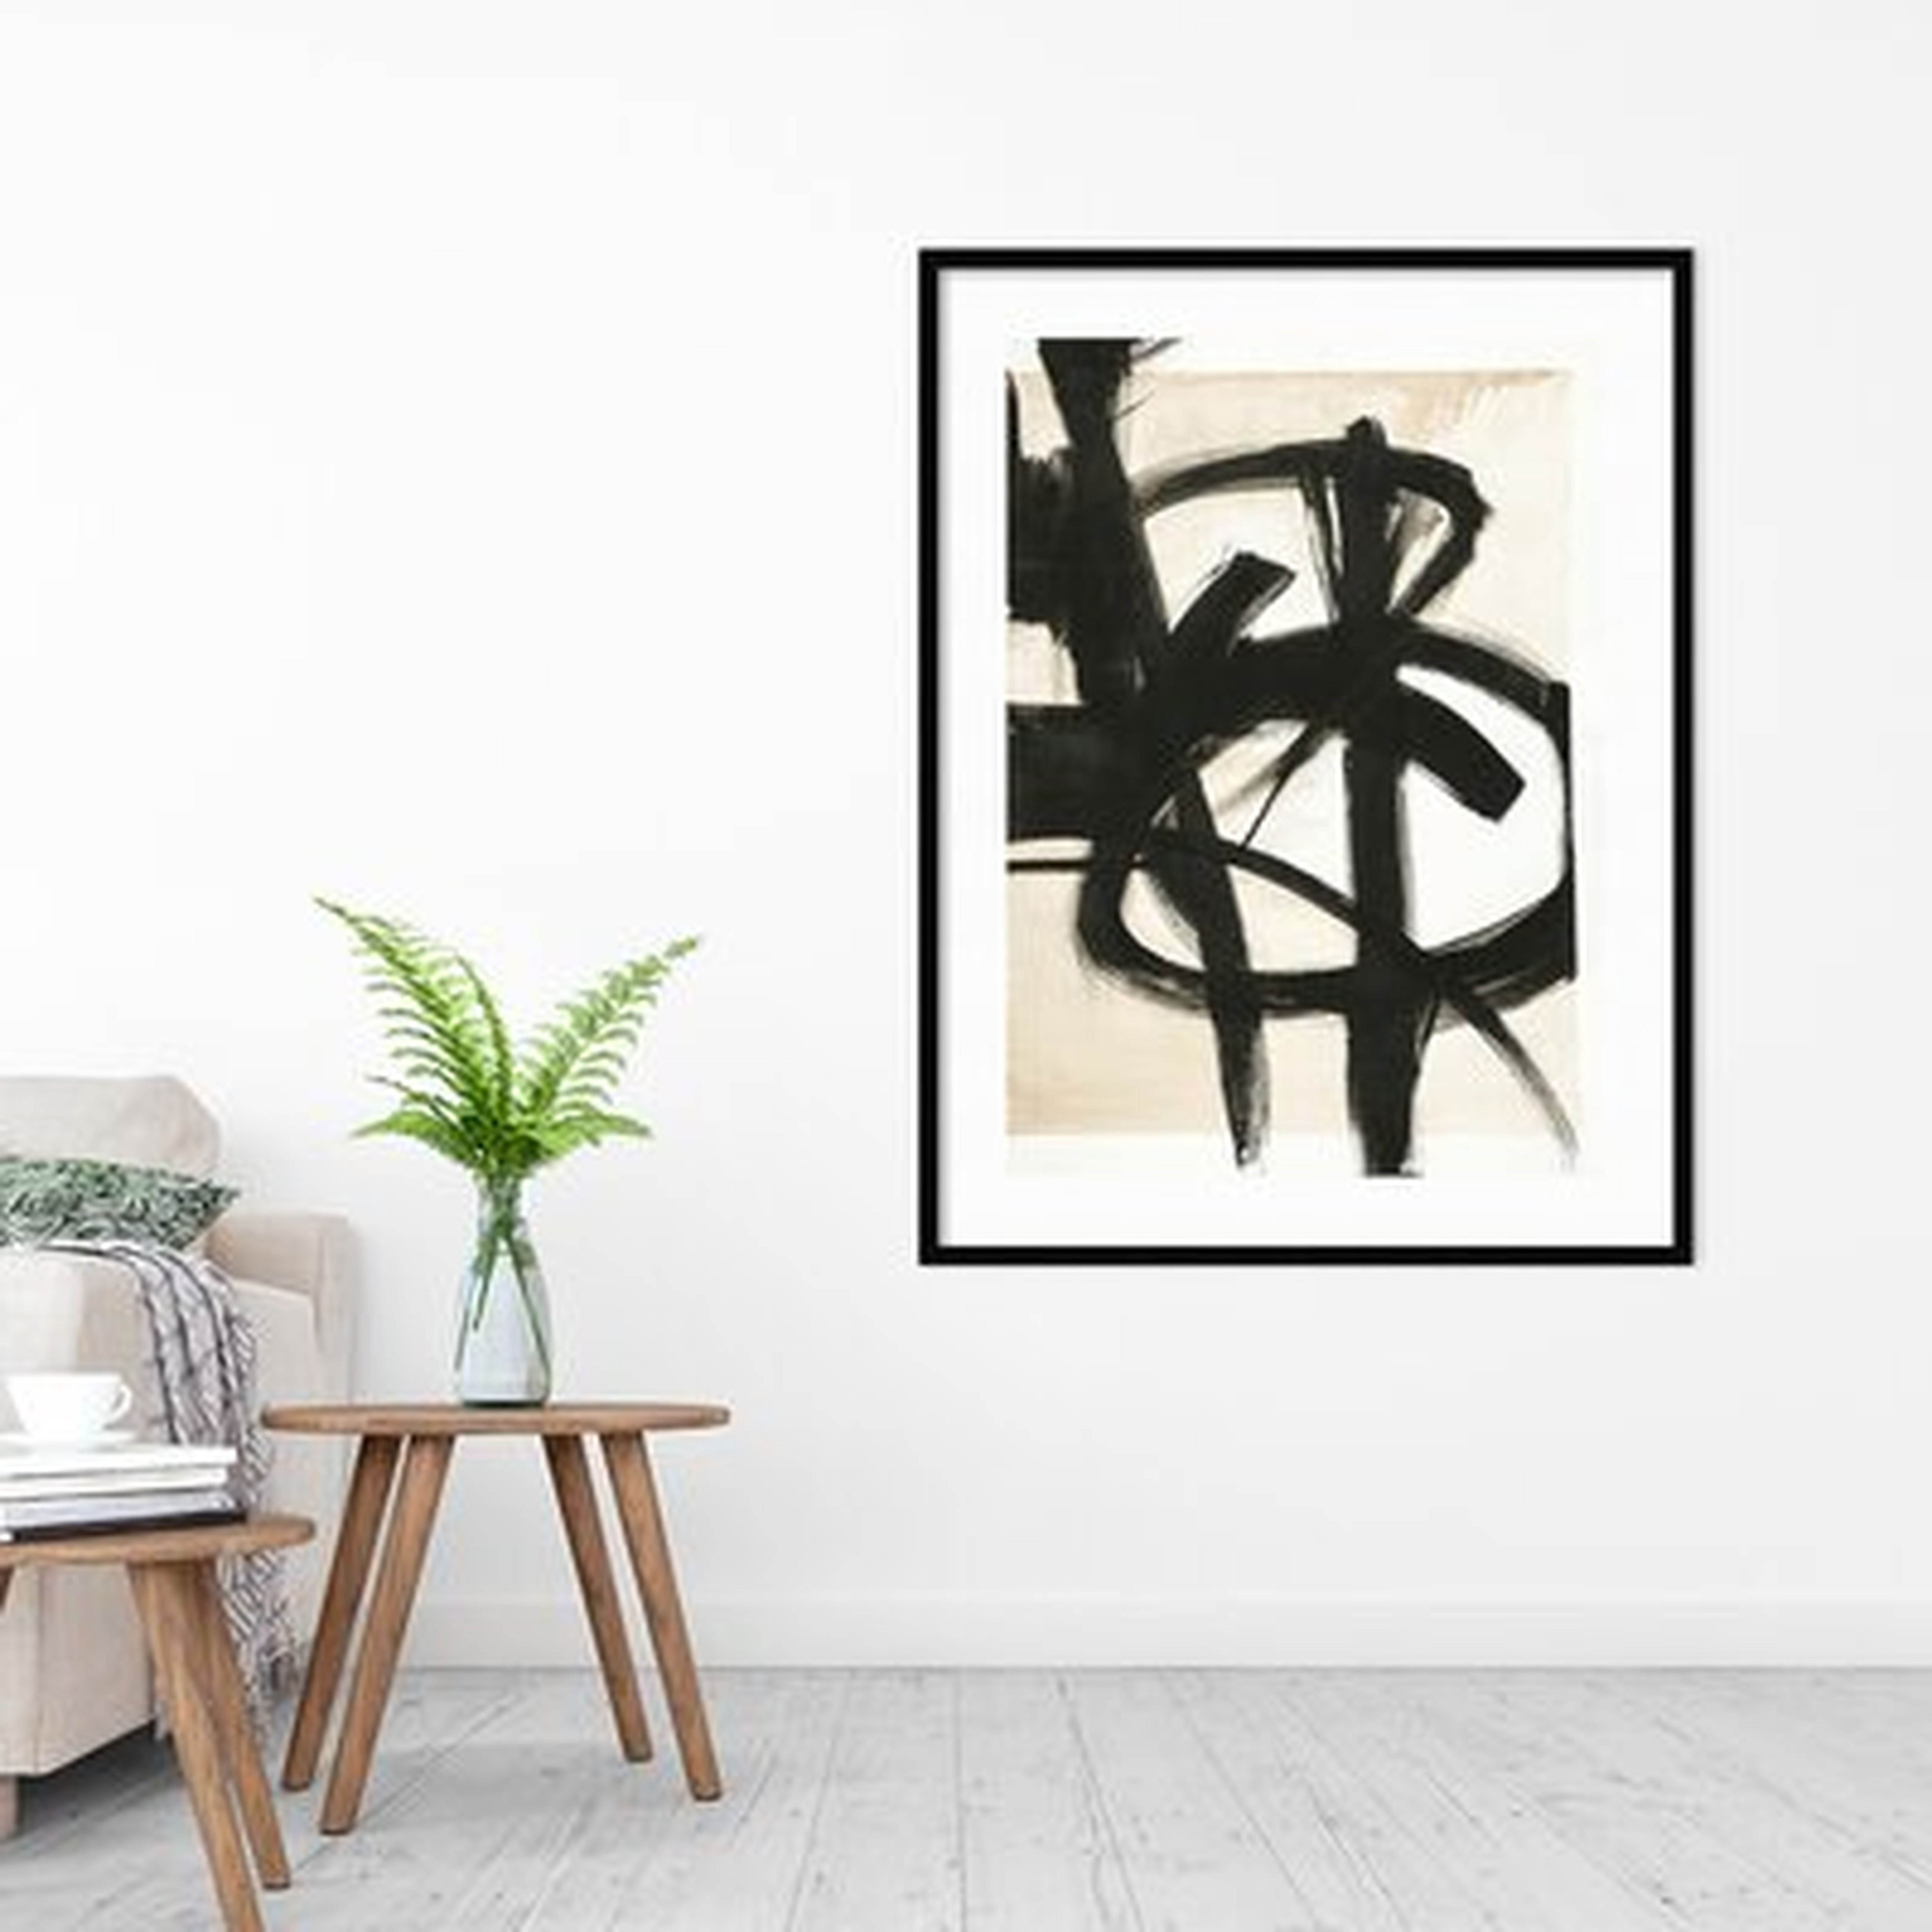 Graphical Shapes 7 by Design Fabrikken - Picture Frame Graphic Art Print on Paper - AllModern